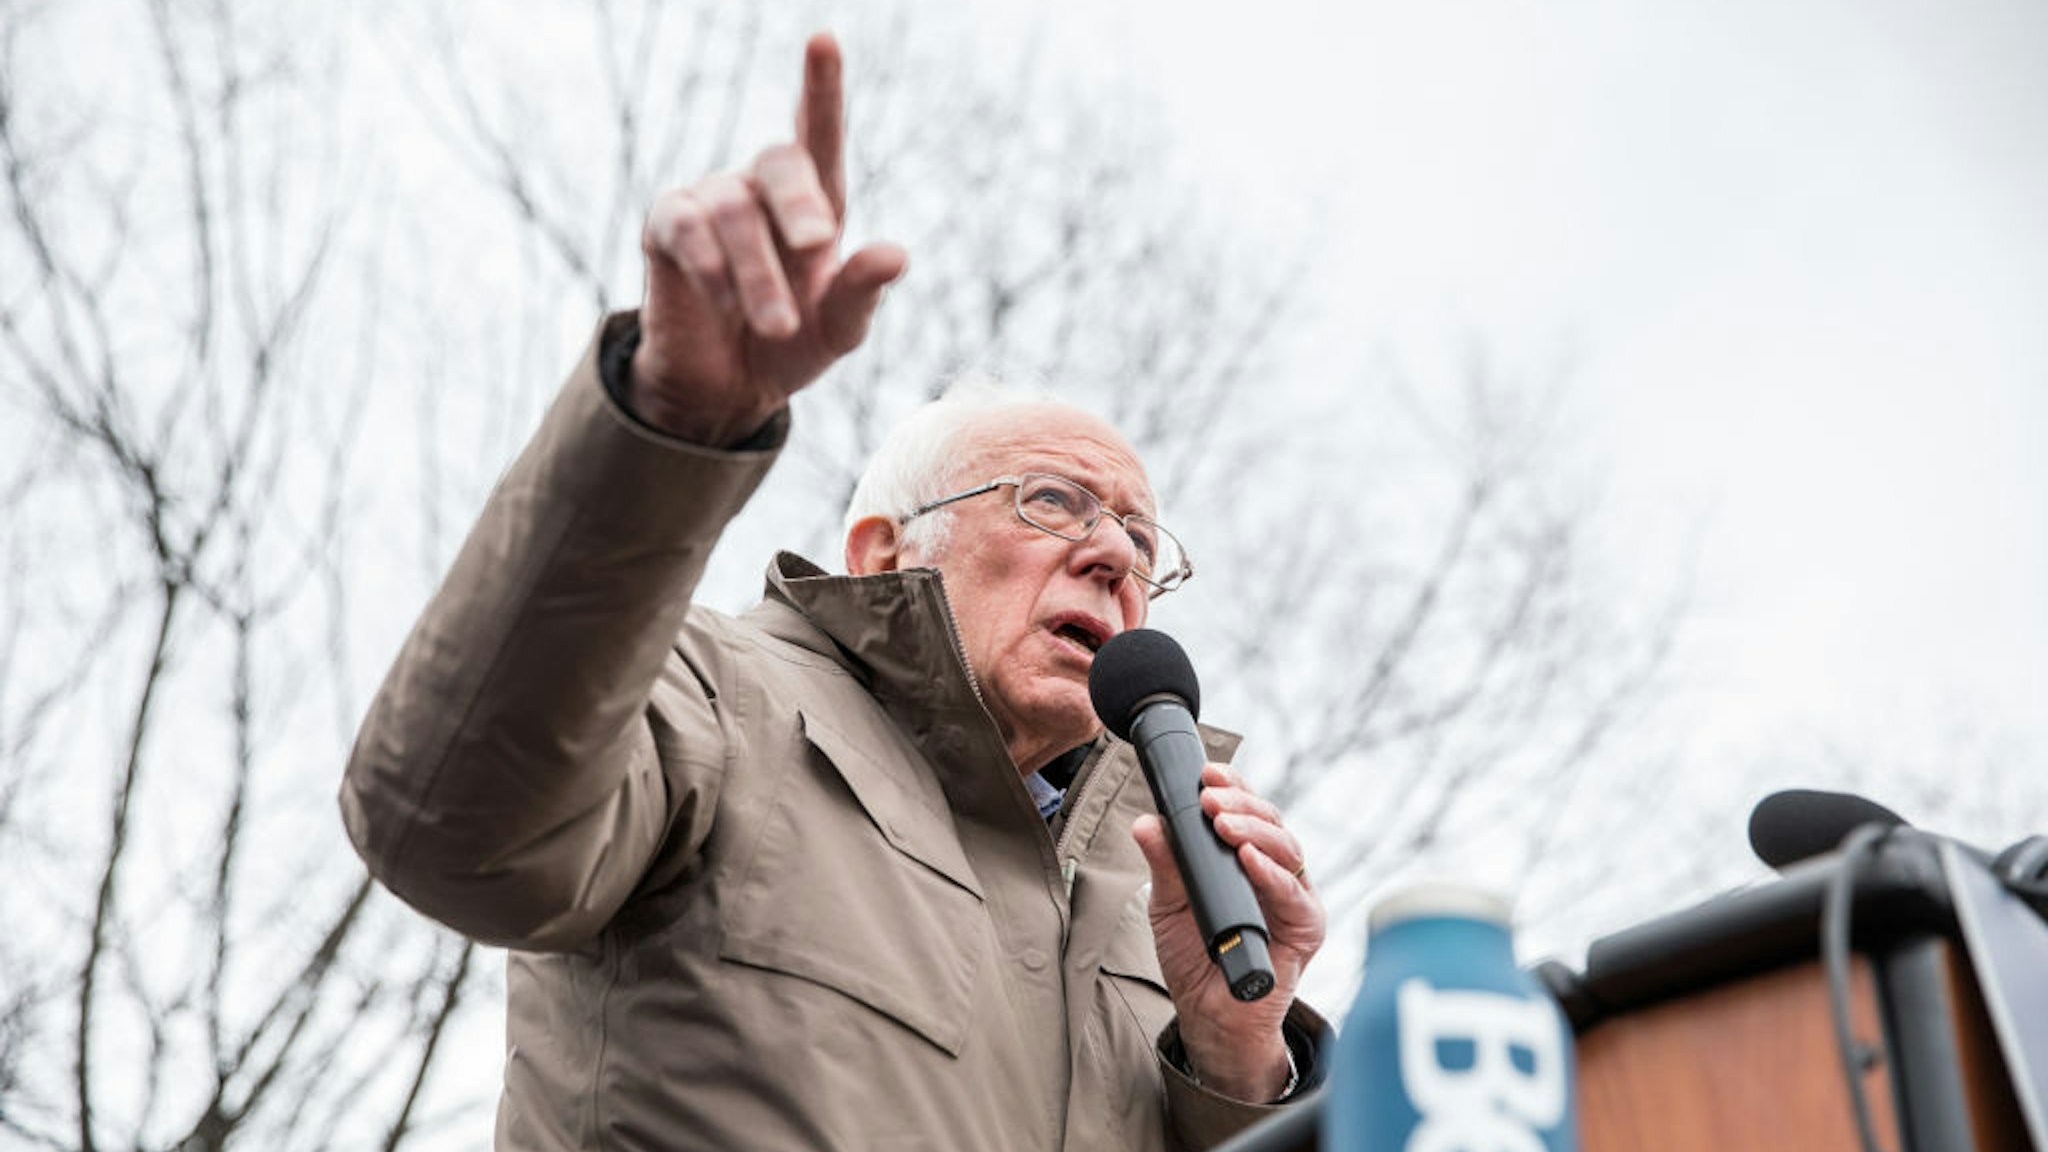 Democratic presidential candidate Sen. Bernie Sanders (I-VT) speaks to thousands during a campaign rally on the Boston Common on February 29, 2020 in Boston, Massachusetts.